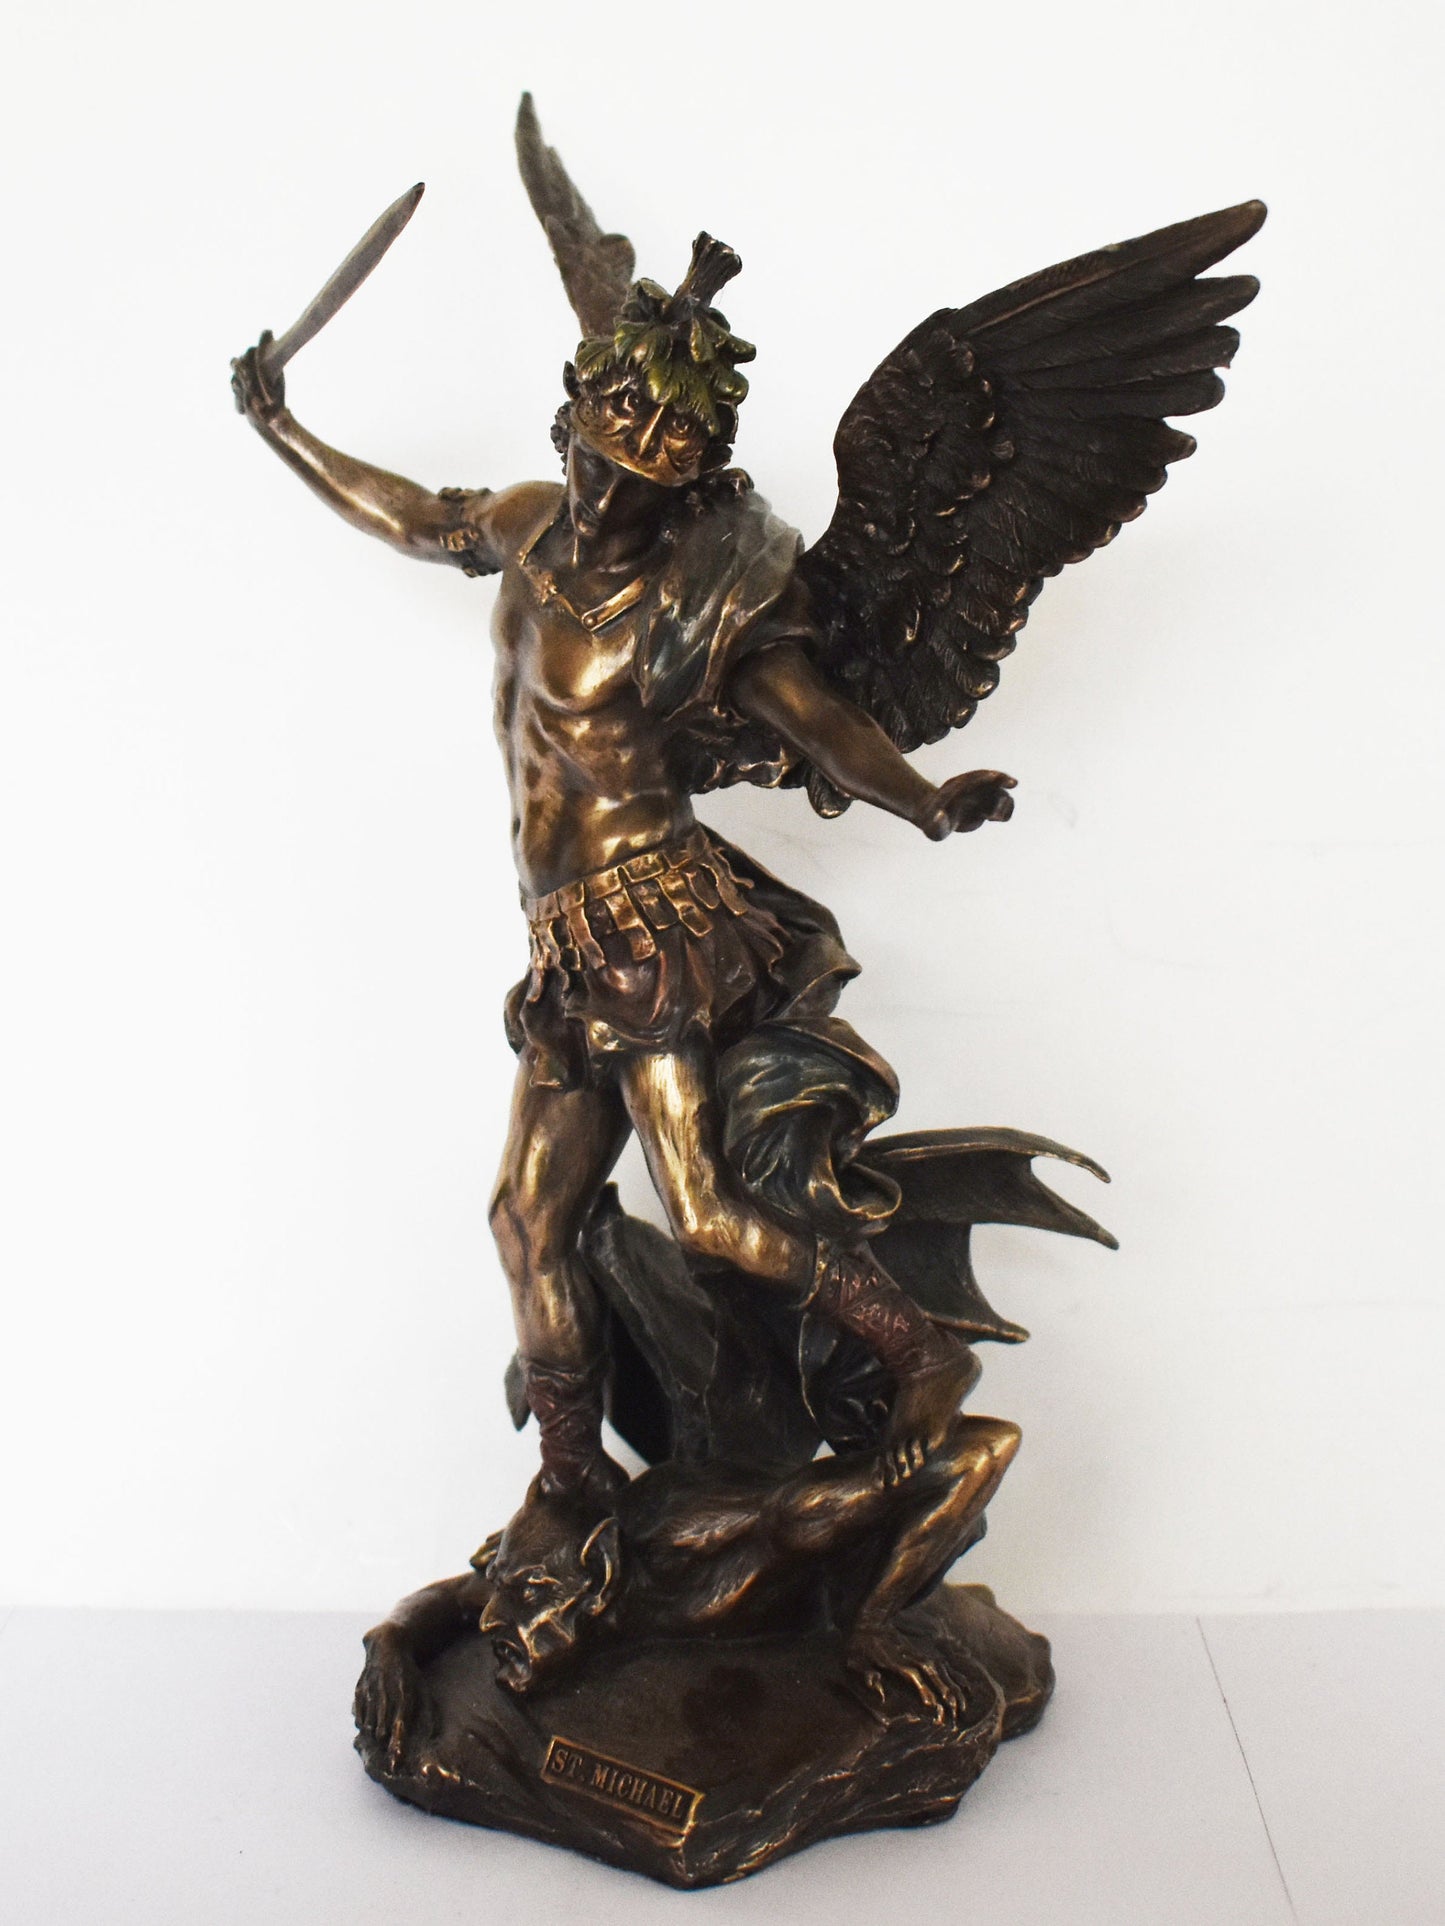 Archangel Michael - Leader of God's Armies against Satan's Forces in the Book of Revelation - Cold Cast Bronze Resin